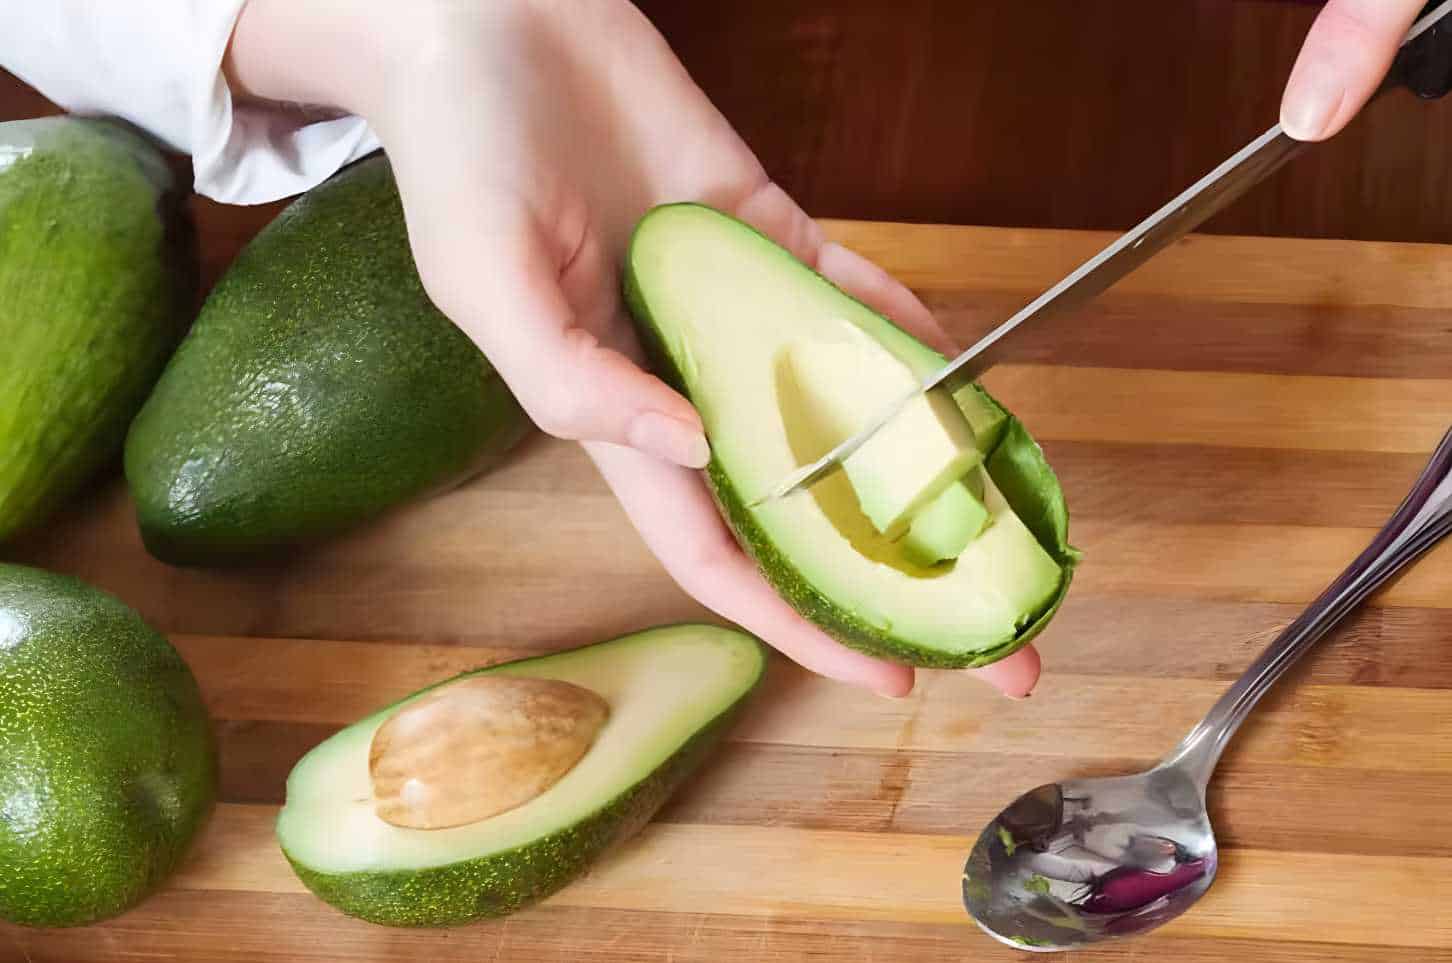 Things to Keep in Mind When Cutting Avocados for Sushi